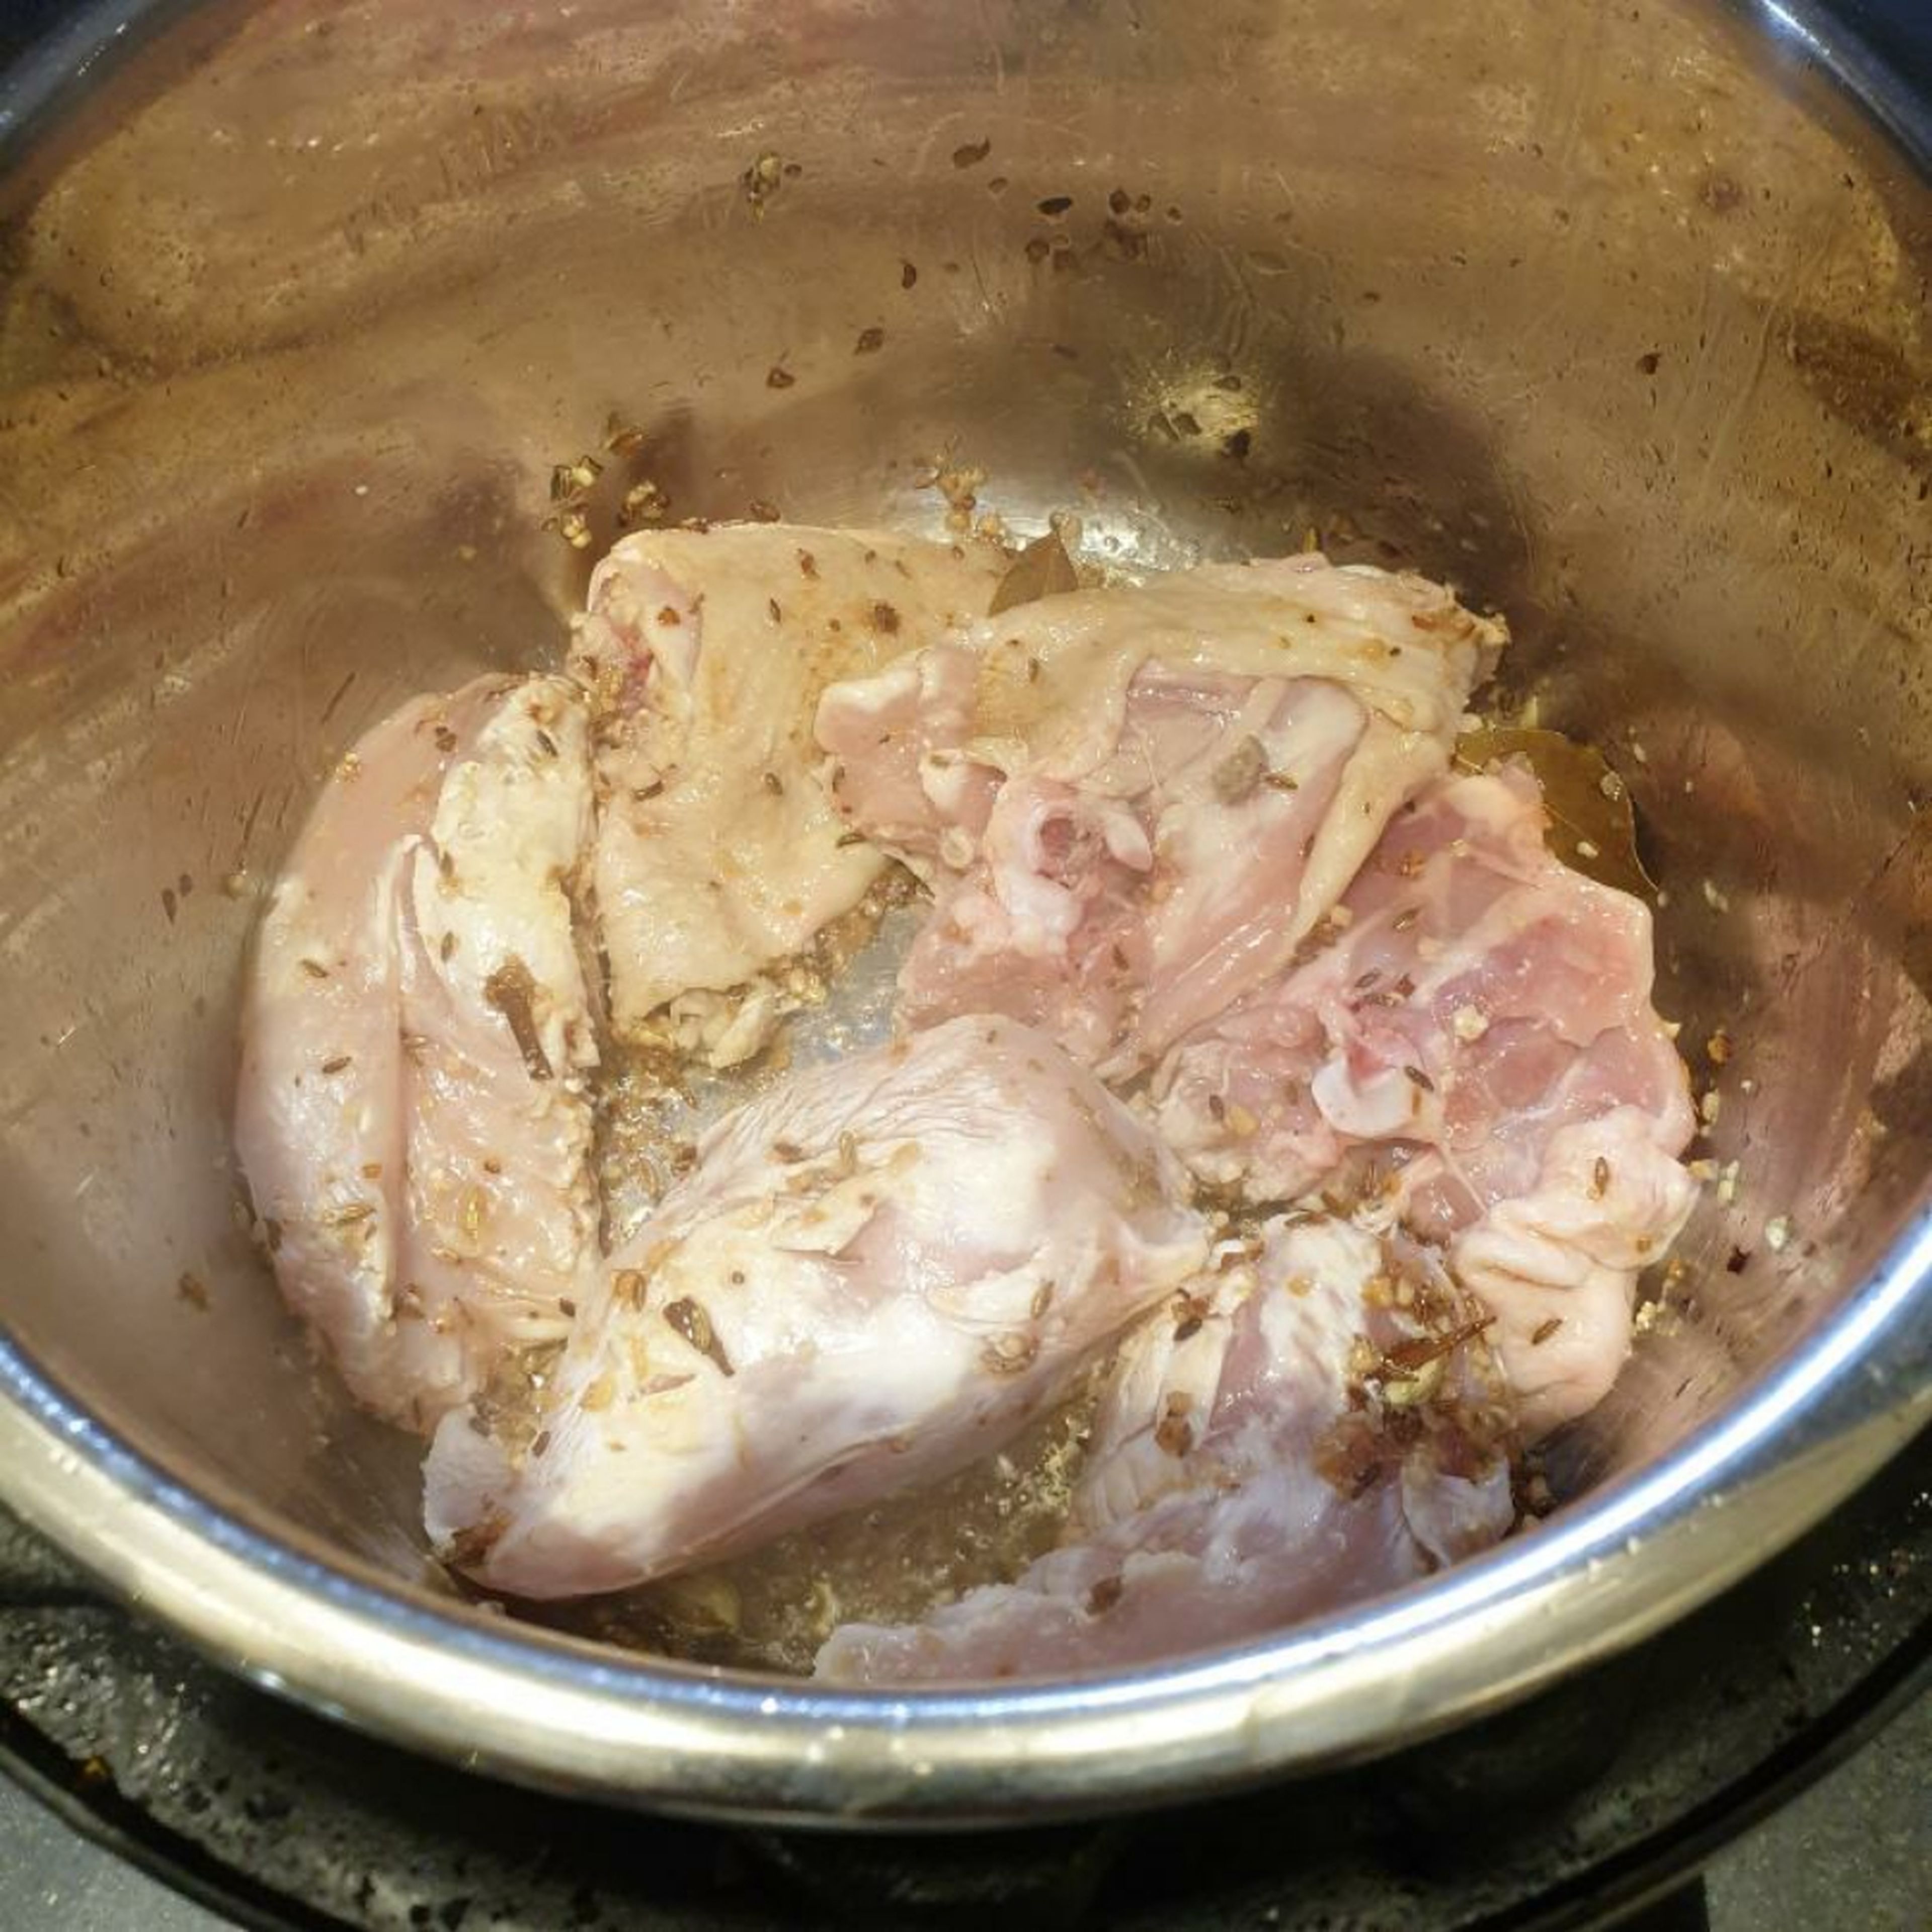 Add the chicken and stir-fry until outside of chicken is no longer pink (around 7 minutes).